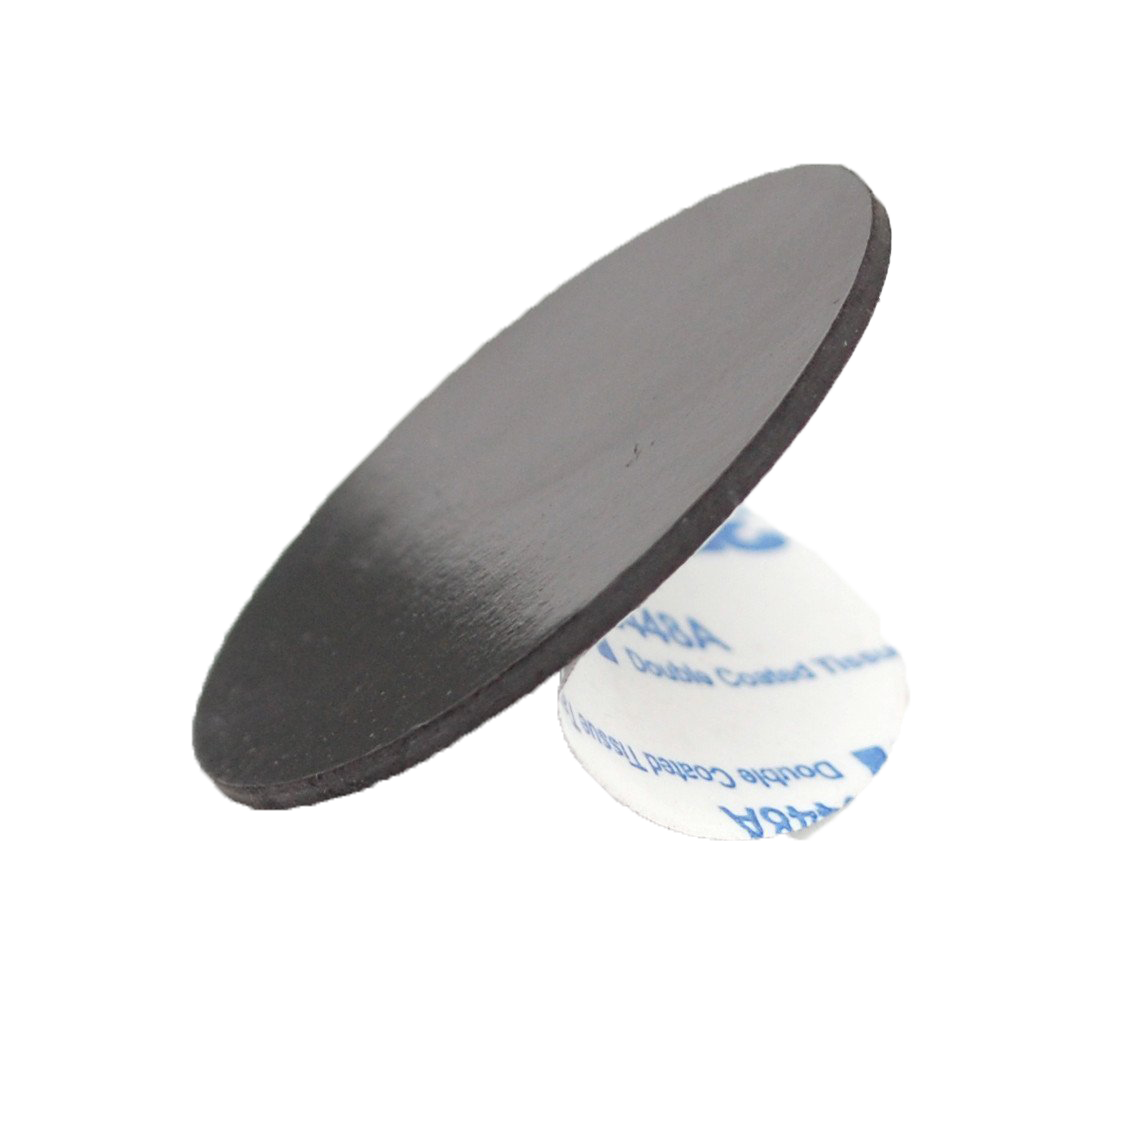 Myster Round Magnet Sticker - Top View with Branded Packaging